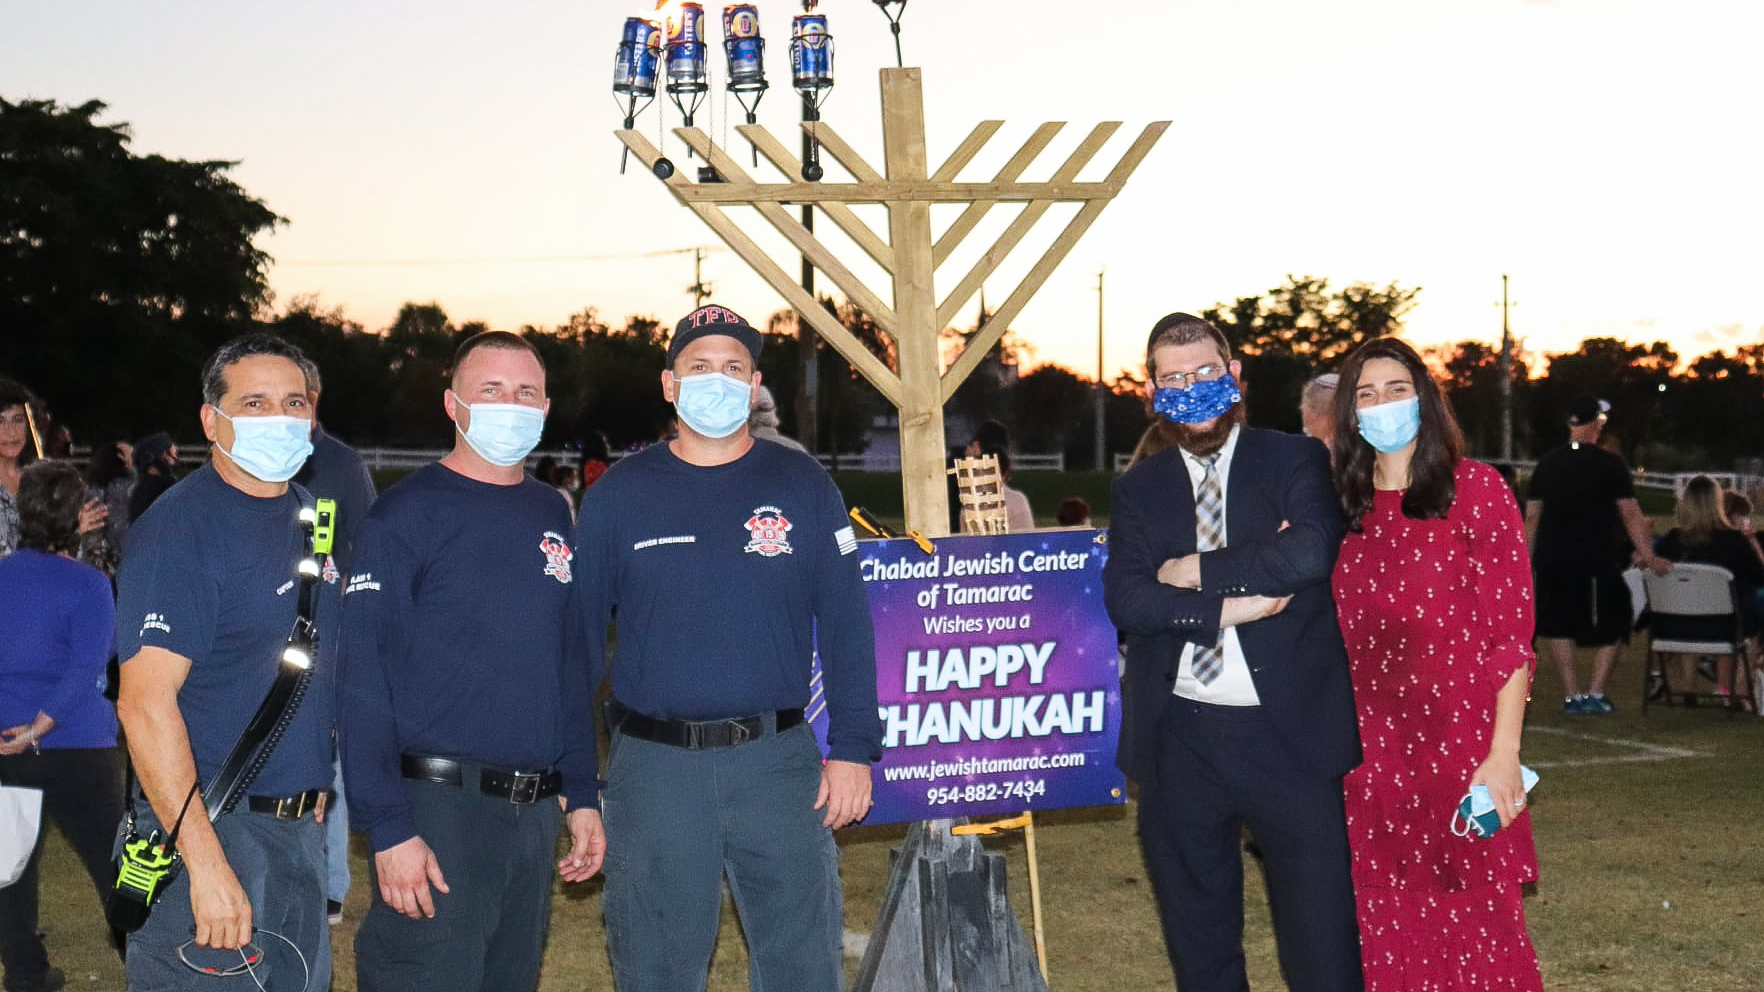 Chabad Jewish Center of Tamarac Kicks-off First Night of Chanukah with Glow in The Dark Party